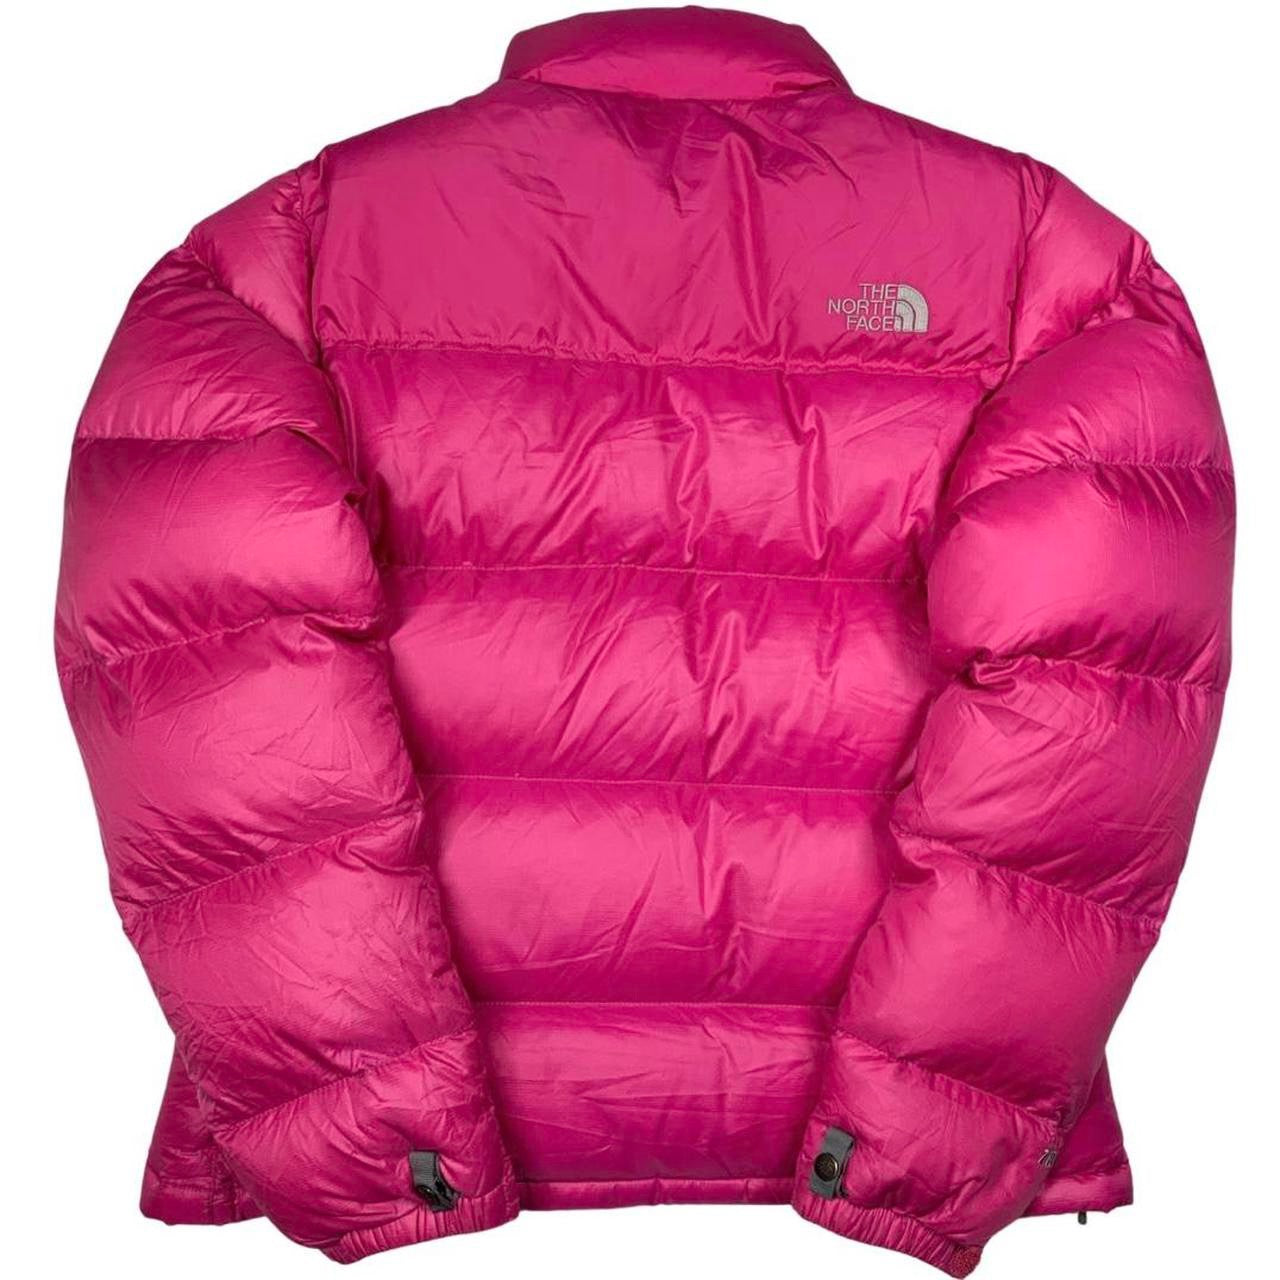 The North Face 700 Nupste Down Puffer Jacket in Pink – Ethan’s Emporium